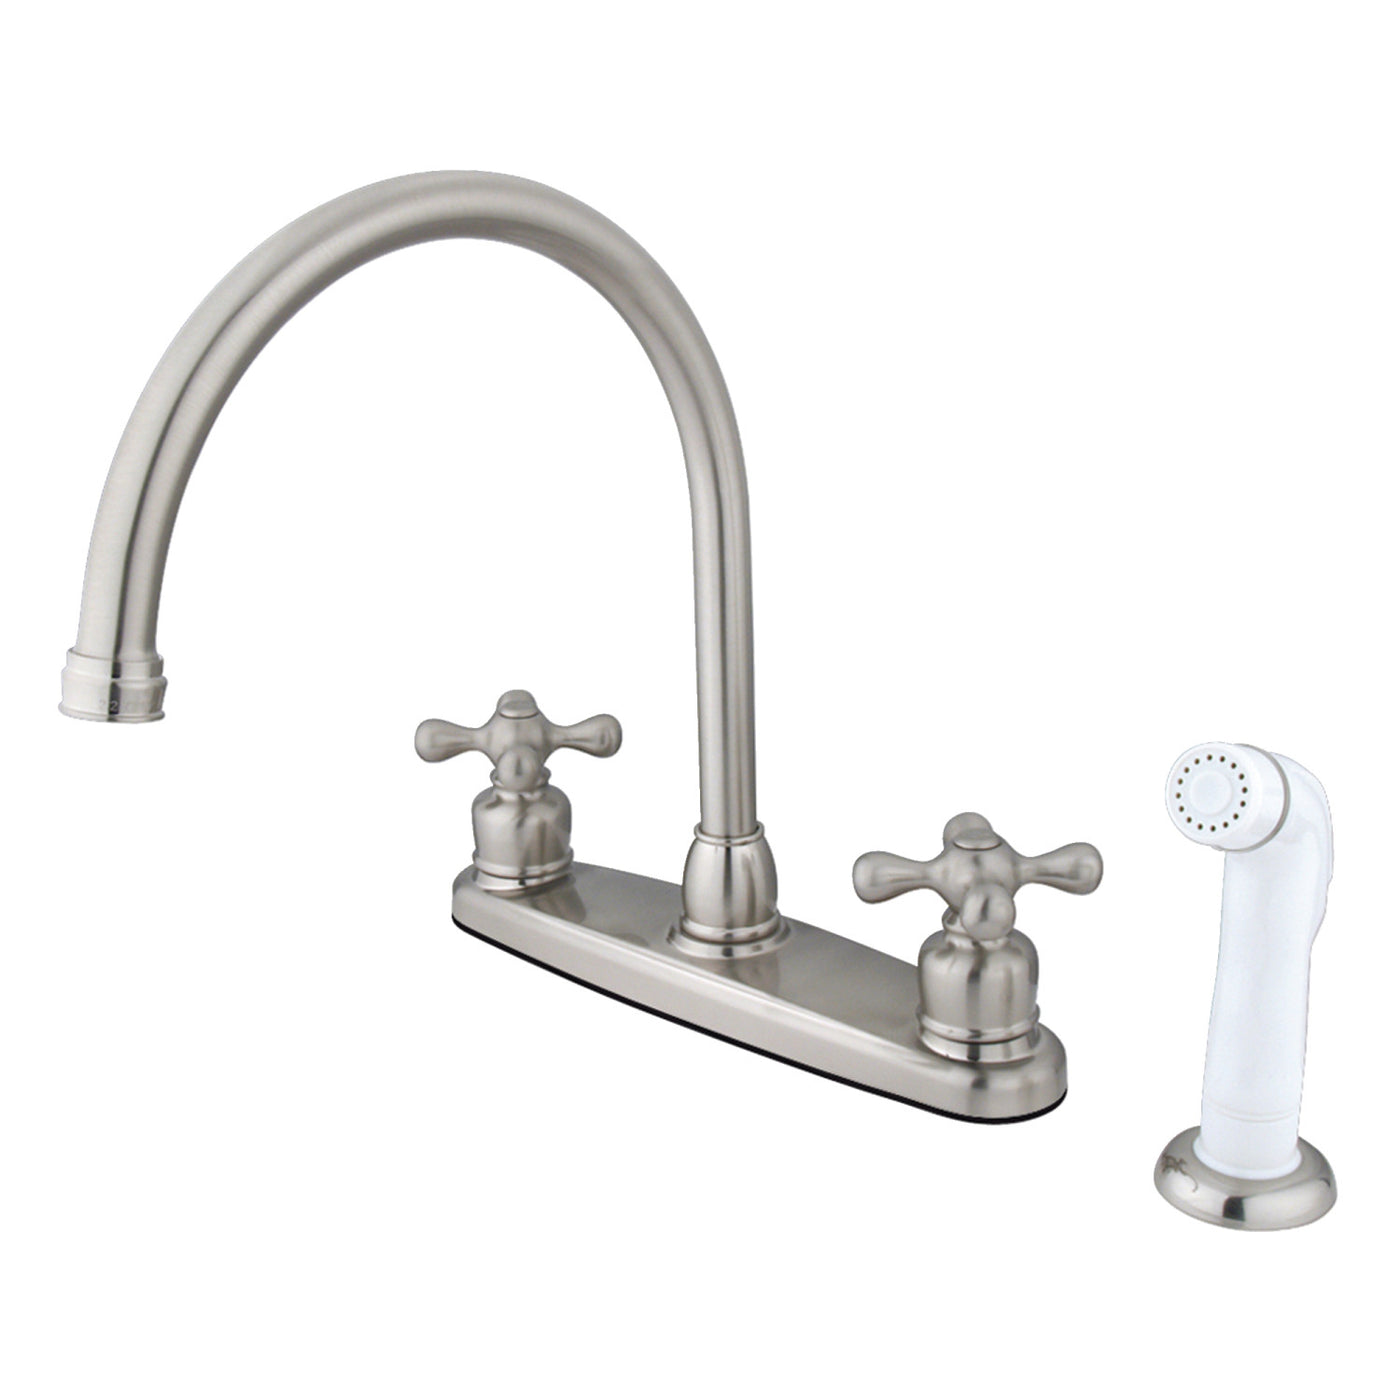 Elements of Design EB728AX Centerset Kitchen Faucet, Brushed Nickel